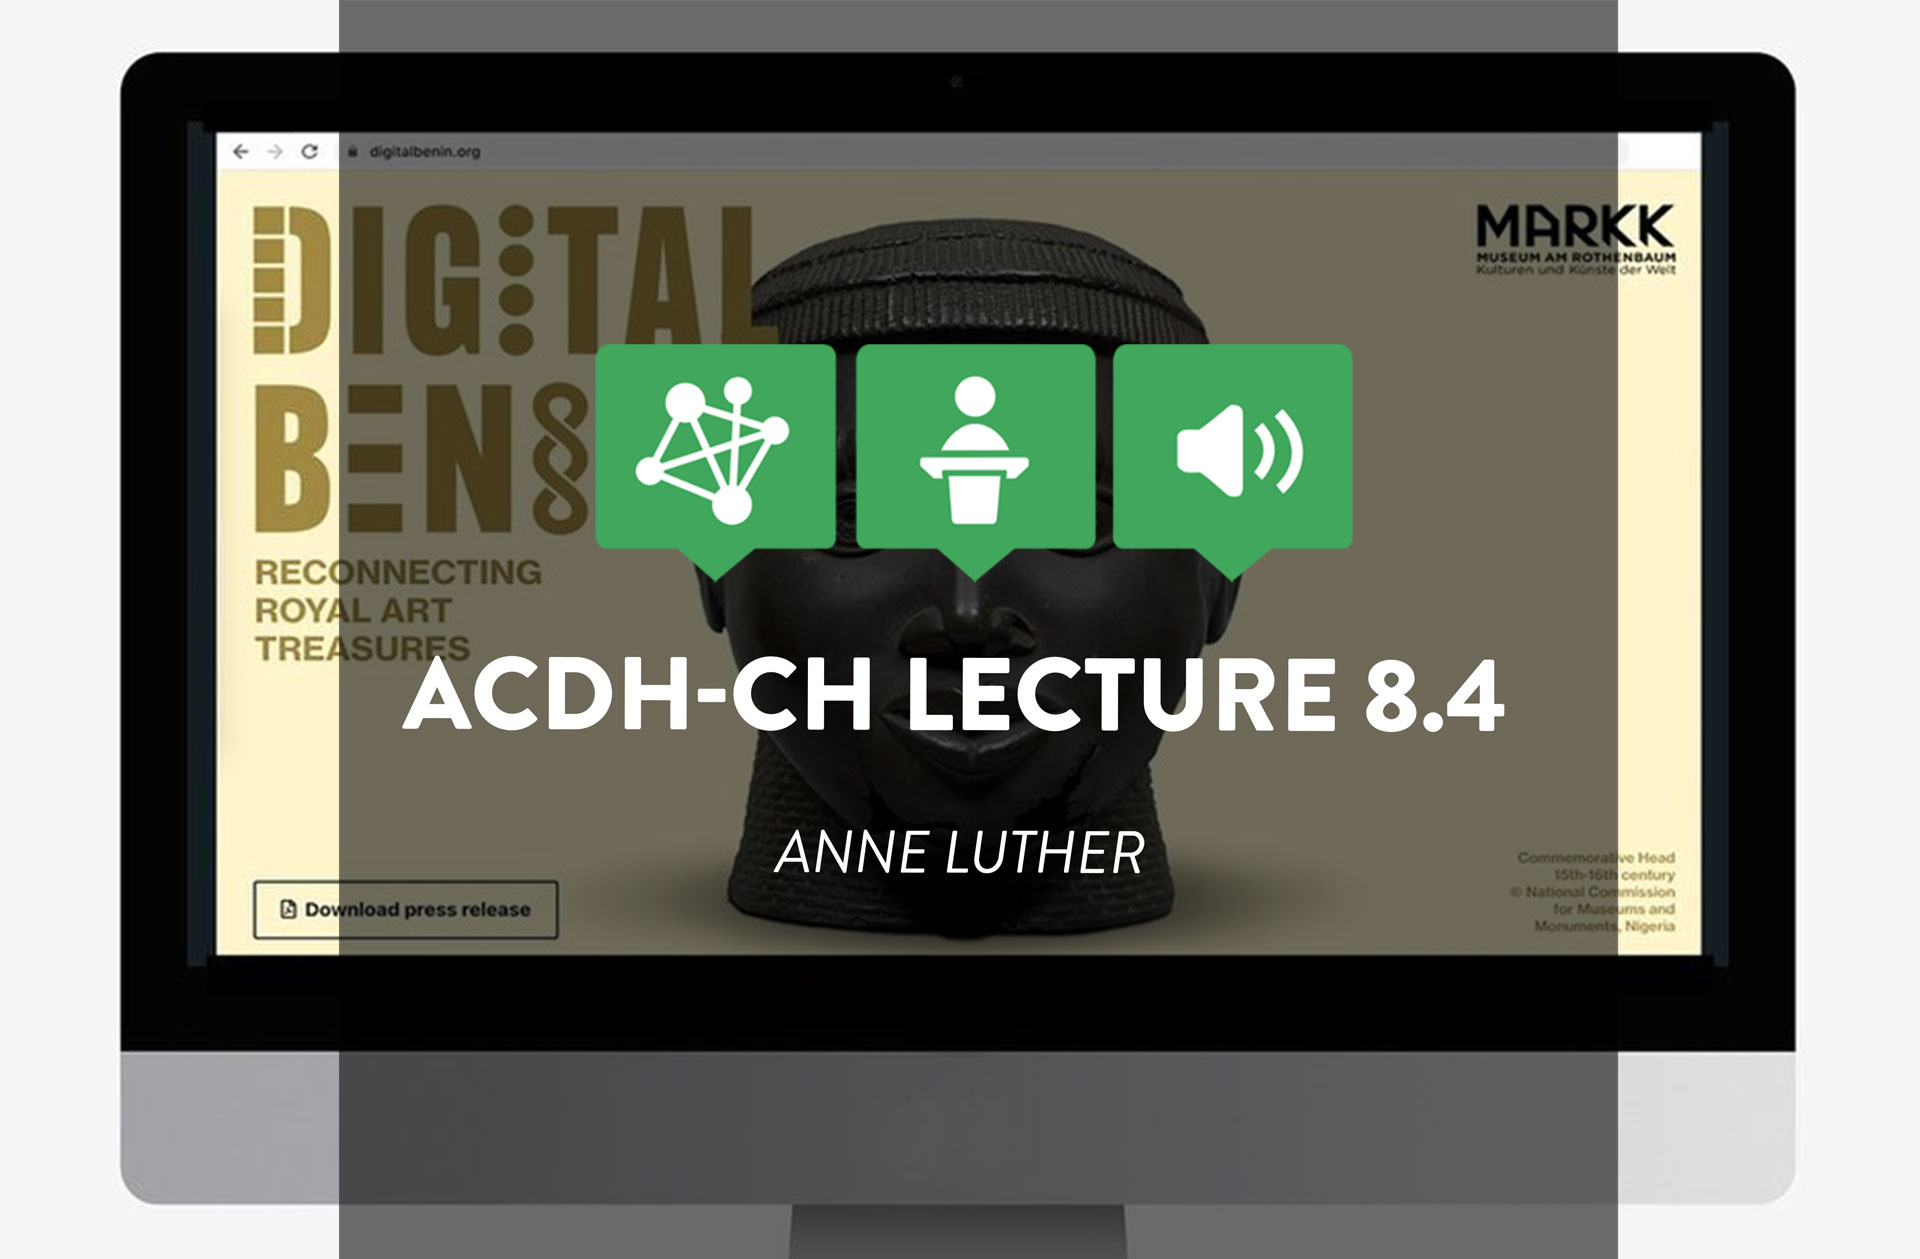 ACDH-CH Lecture 8.4 – Contextualizing Museum Data: Digitization, Infrastructure and digital Literacy